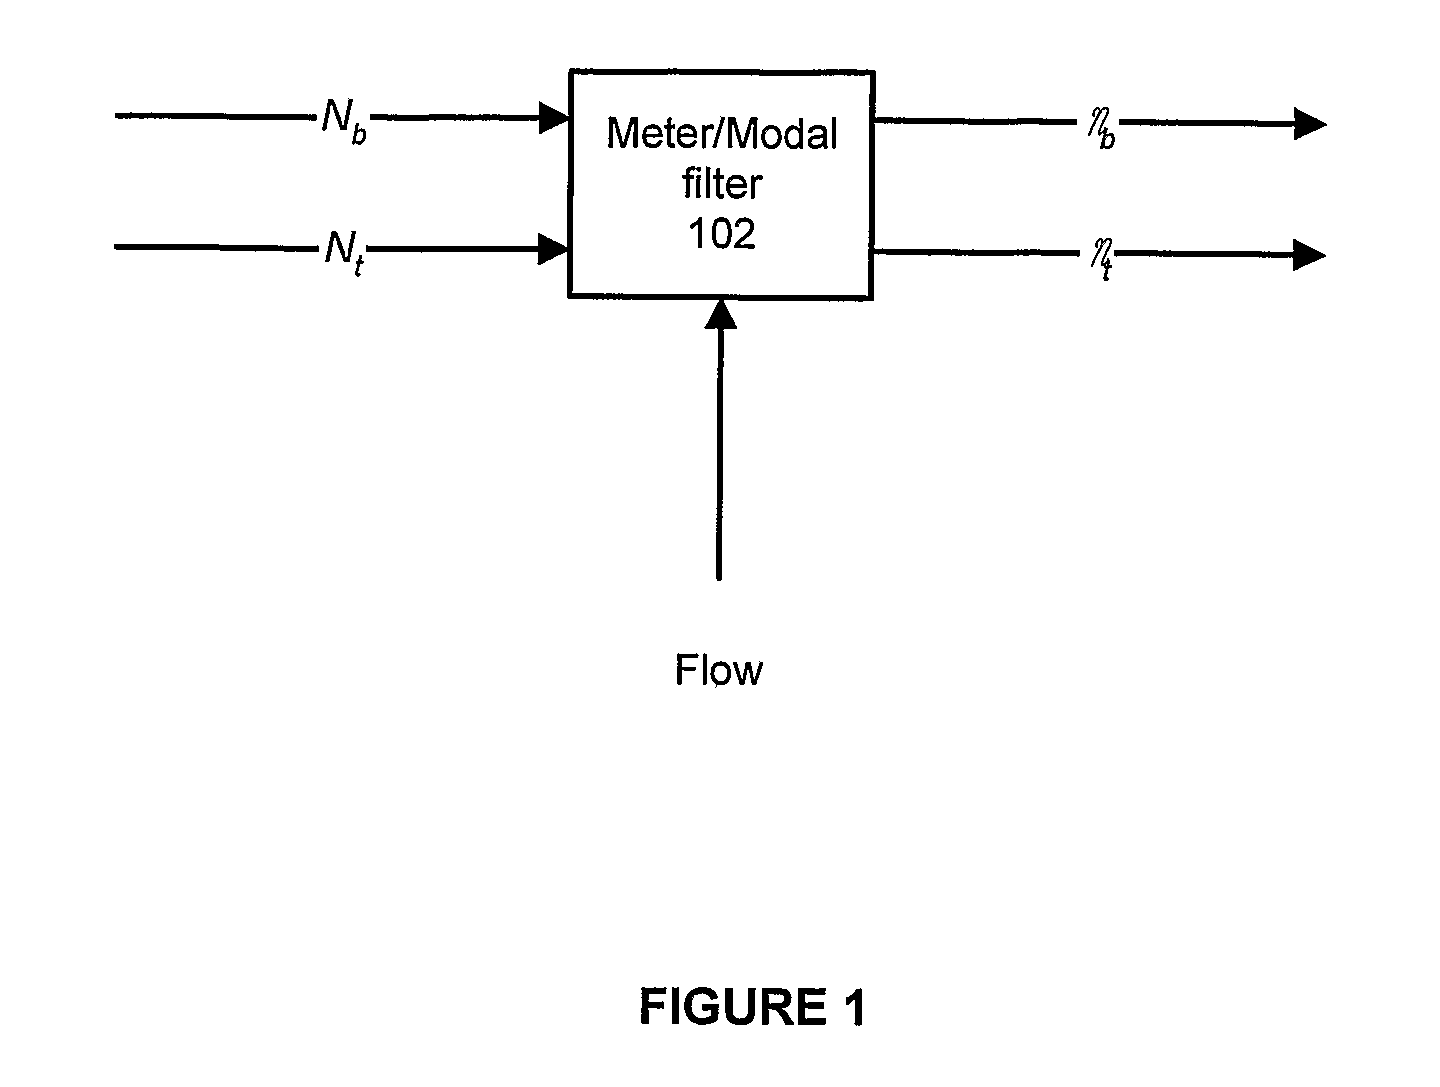 Method and Apparatus for Measuring Flow Through a Conduit by Measuring the Coriolis Coupling Between Two Vibration Modes